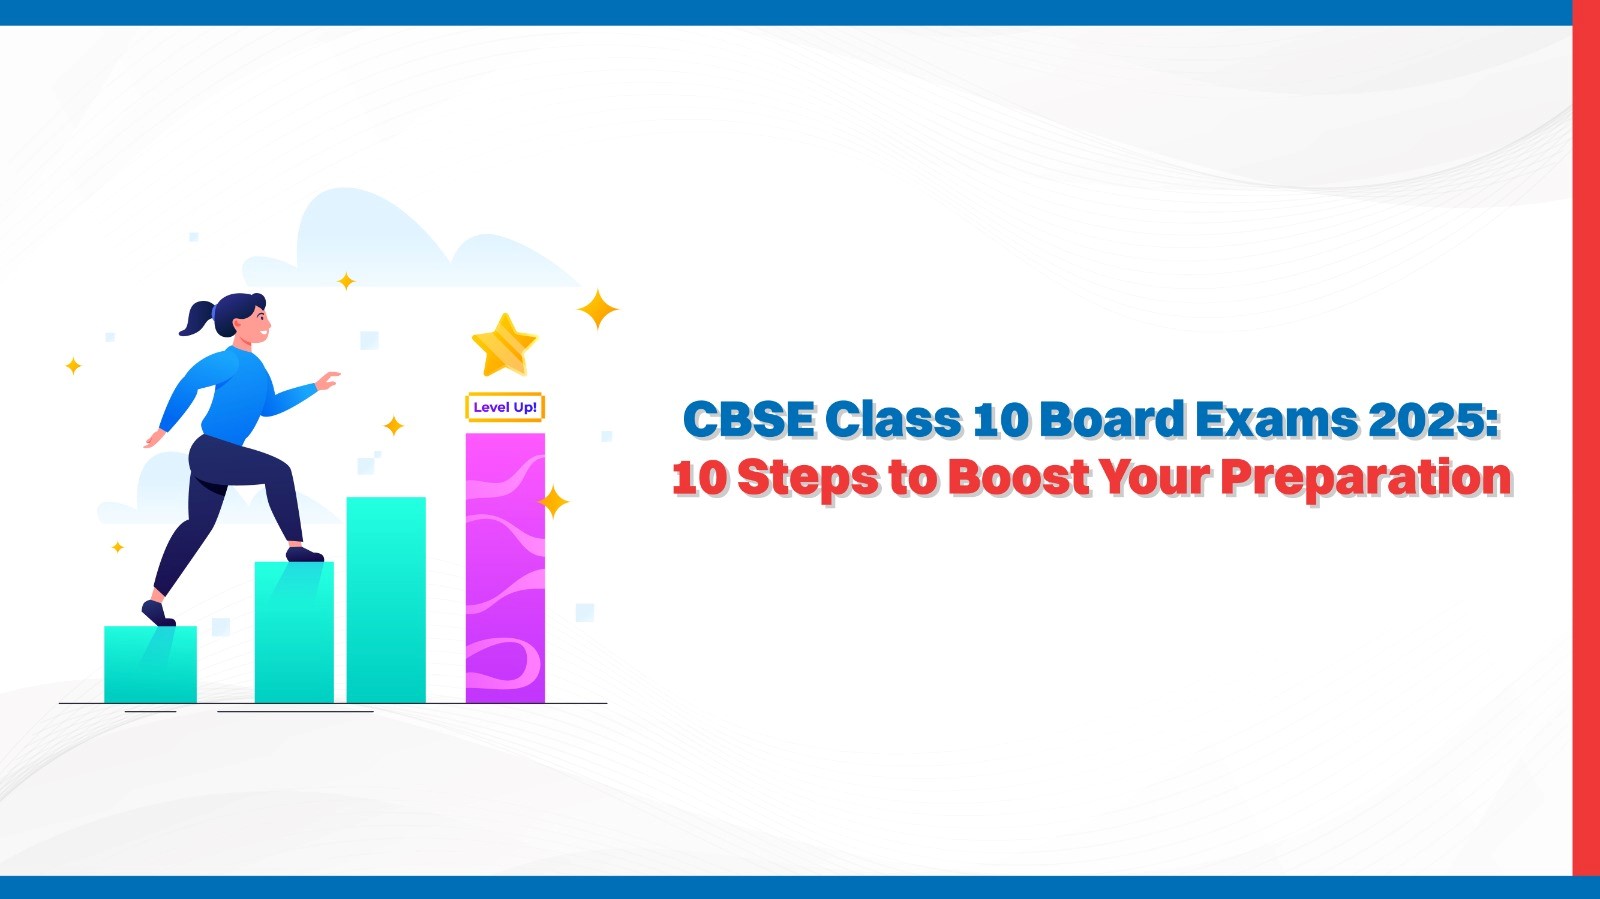 CBSE Class 10 Board Exams 2025: 10 Steps to Boost Your Preparation